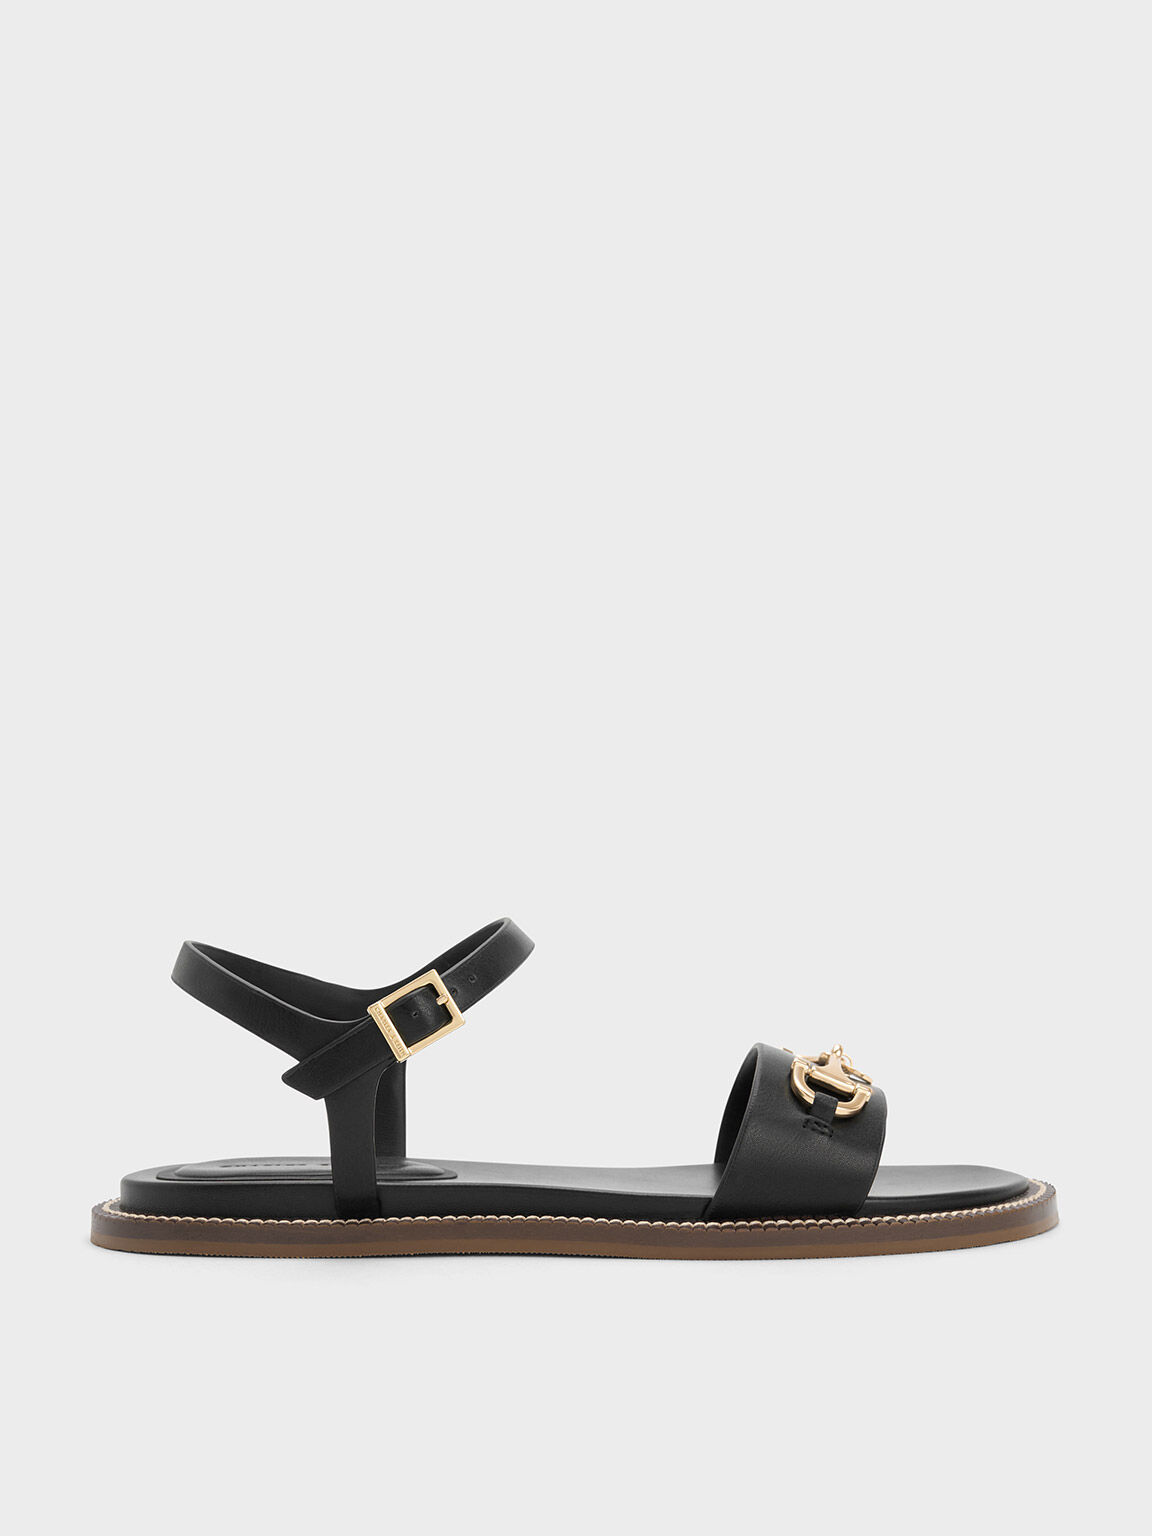 48 Stylish and Comfortable Summer Sandals and Flip Flops for 2021 | Vogue